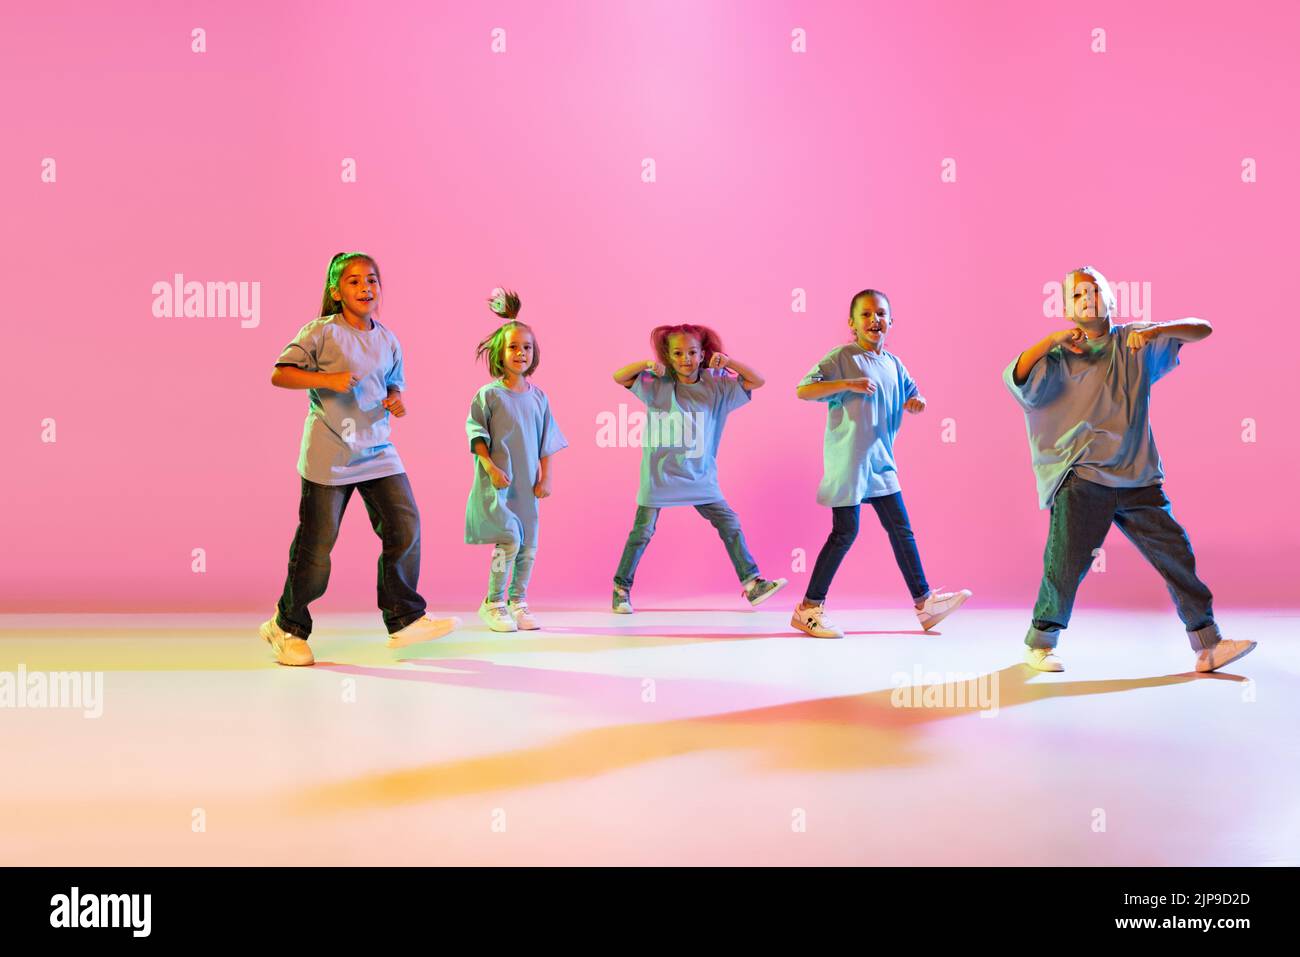 Hip-hop dance, street style. Happy children, little active girls in casual style clothes dancing isolated on orange background in purple neon light. Stock Photo